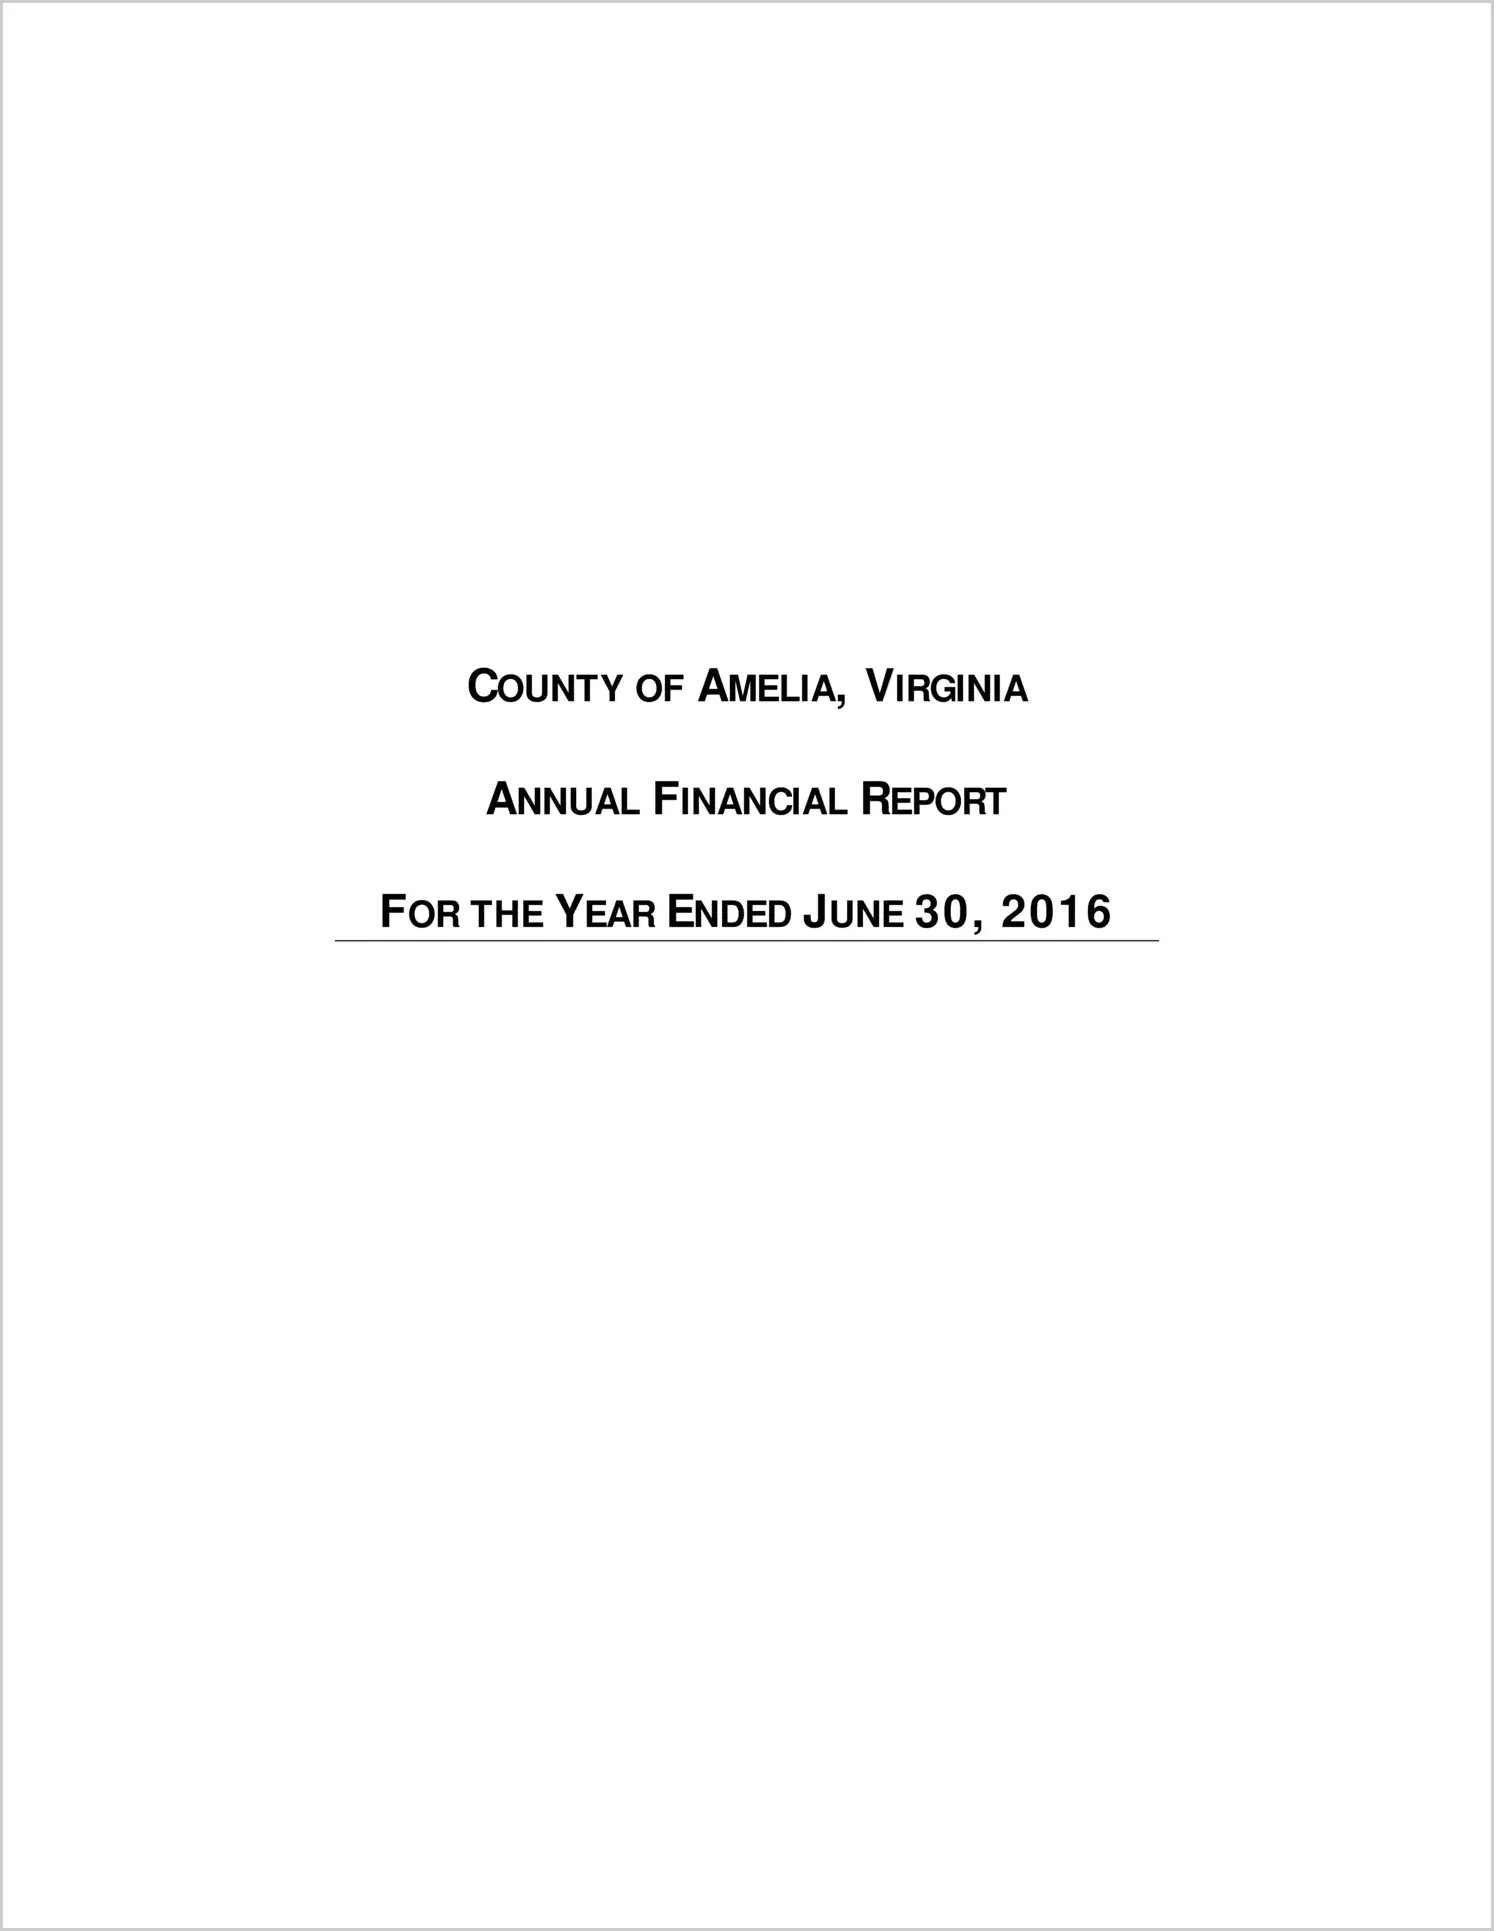 2016 Annual Financial Report for County of Amelia